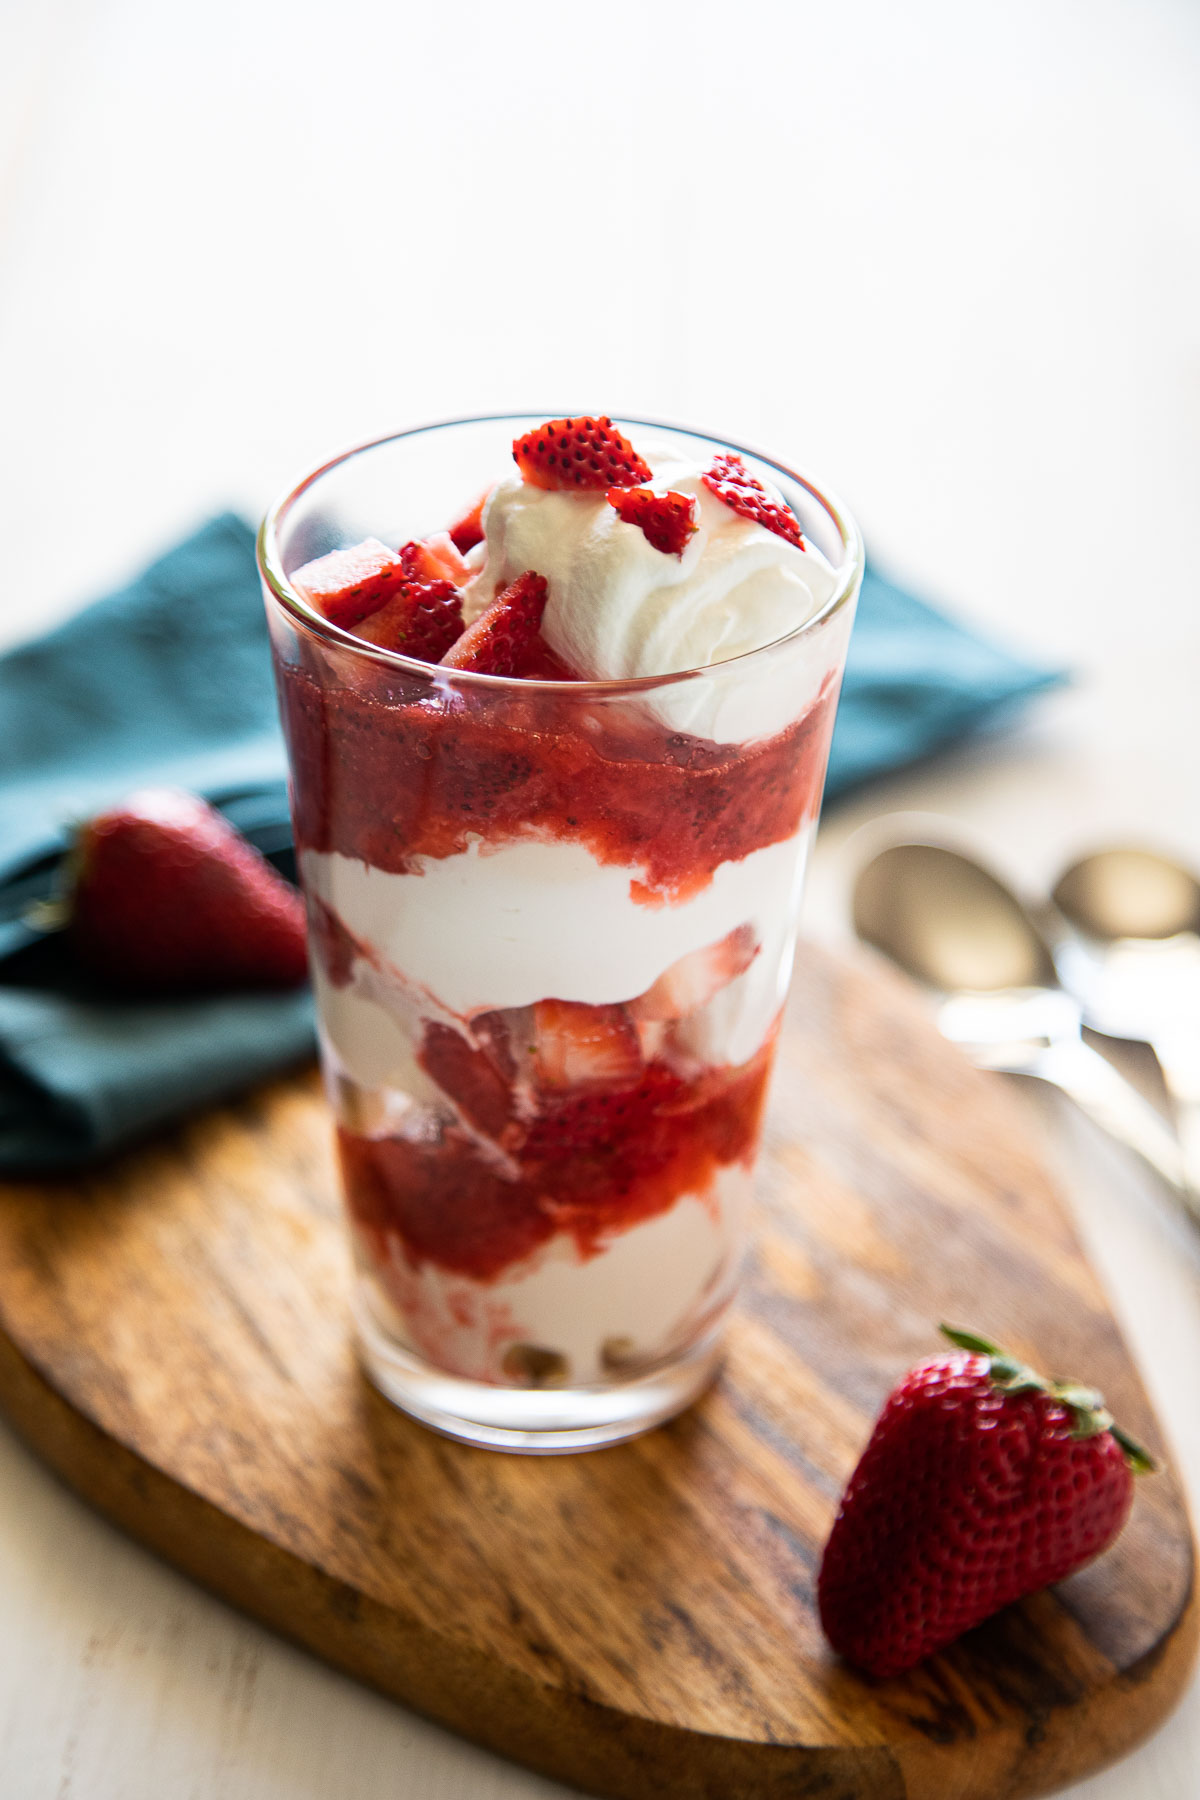 Strawberry Compote Sundae Layered in Pint Glass